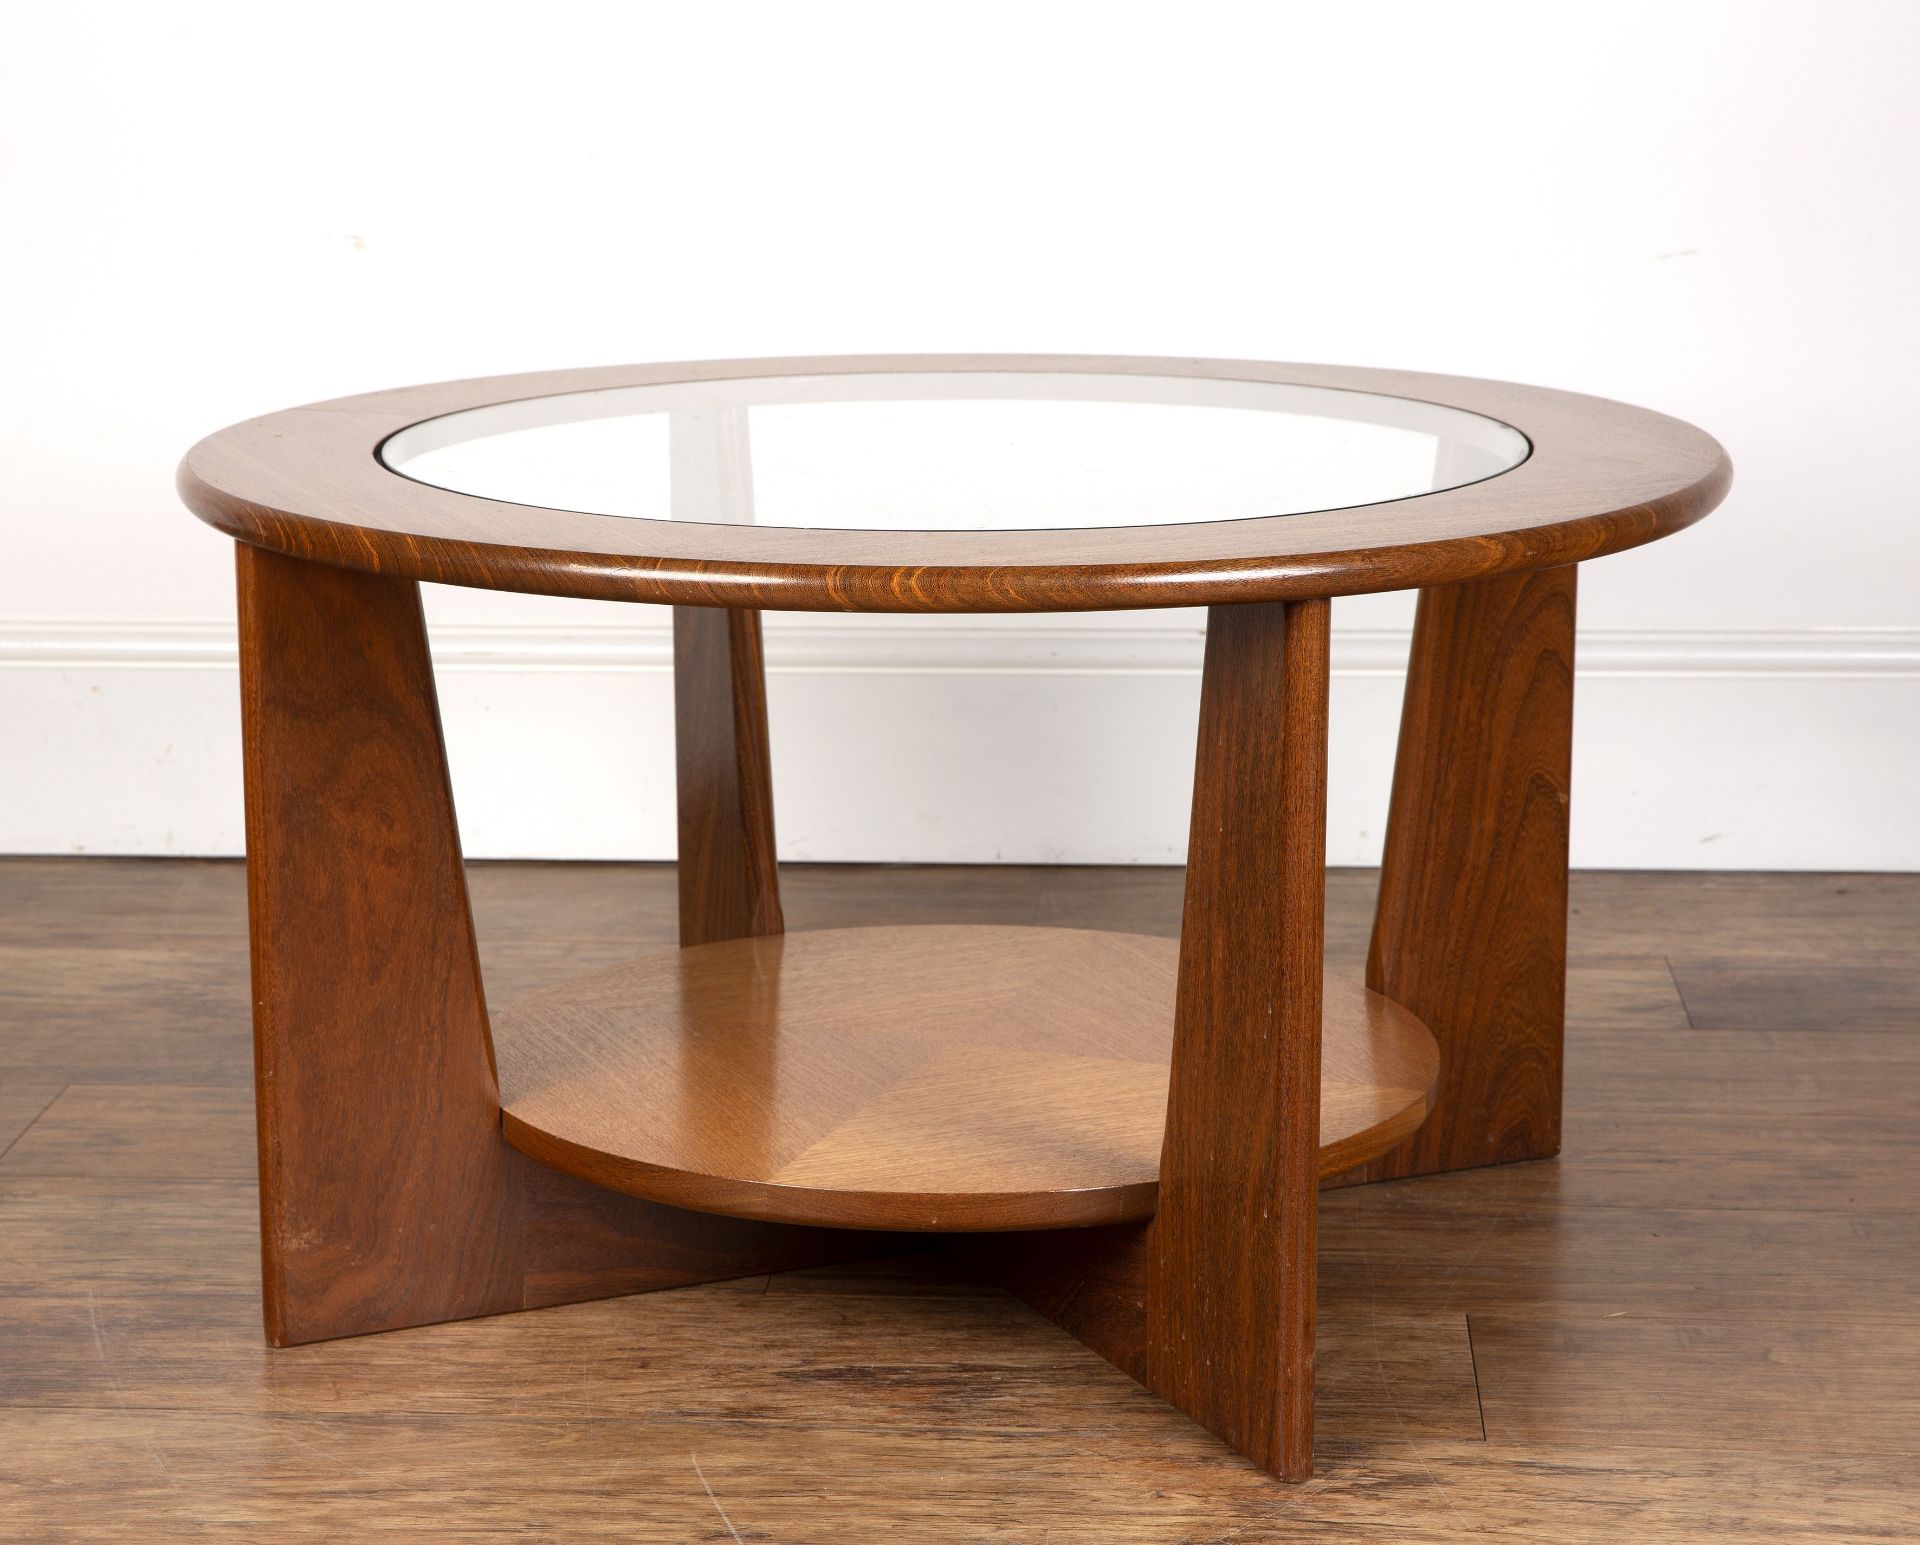 Attributed to G-plan teak, circular coffee table with glass inset top, unmarked, 77.5cm wide x - Image 3 of 5